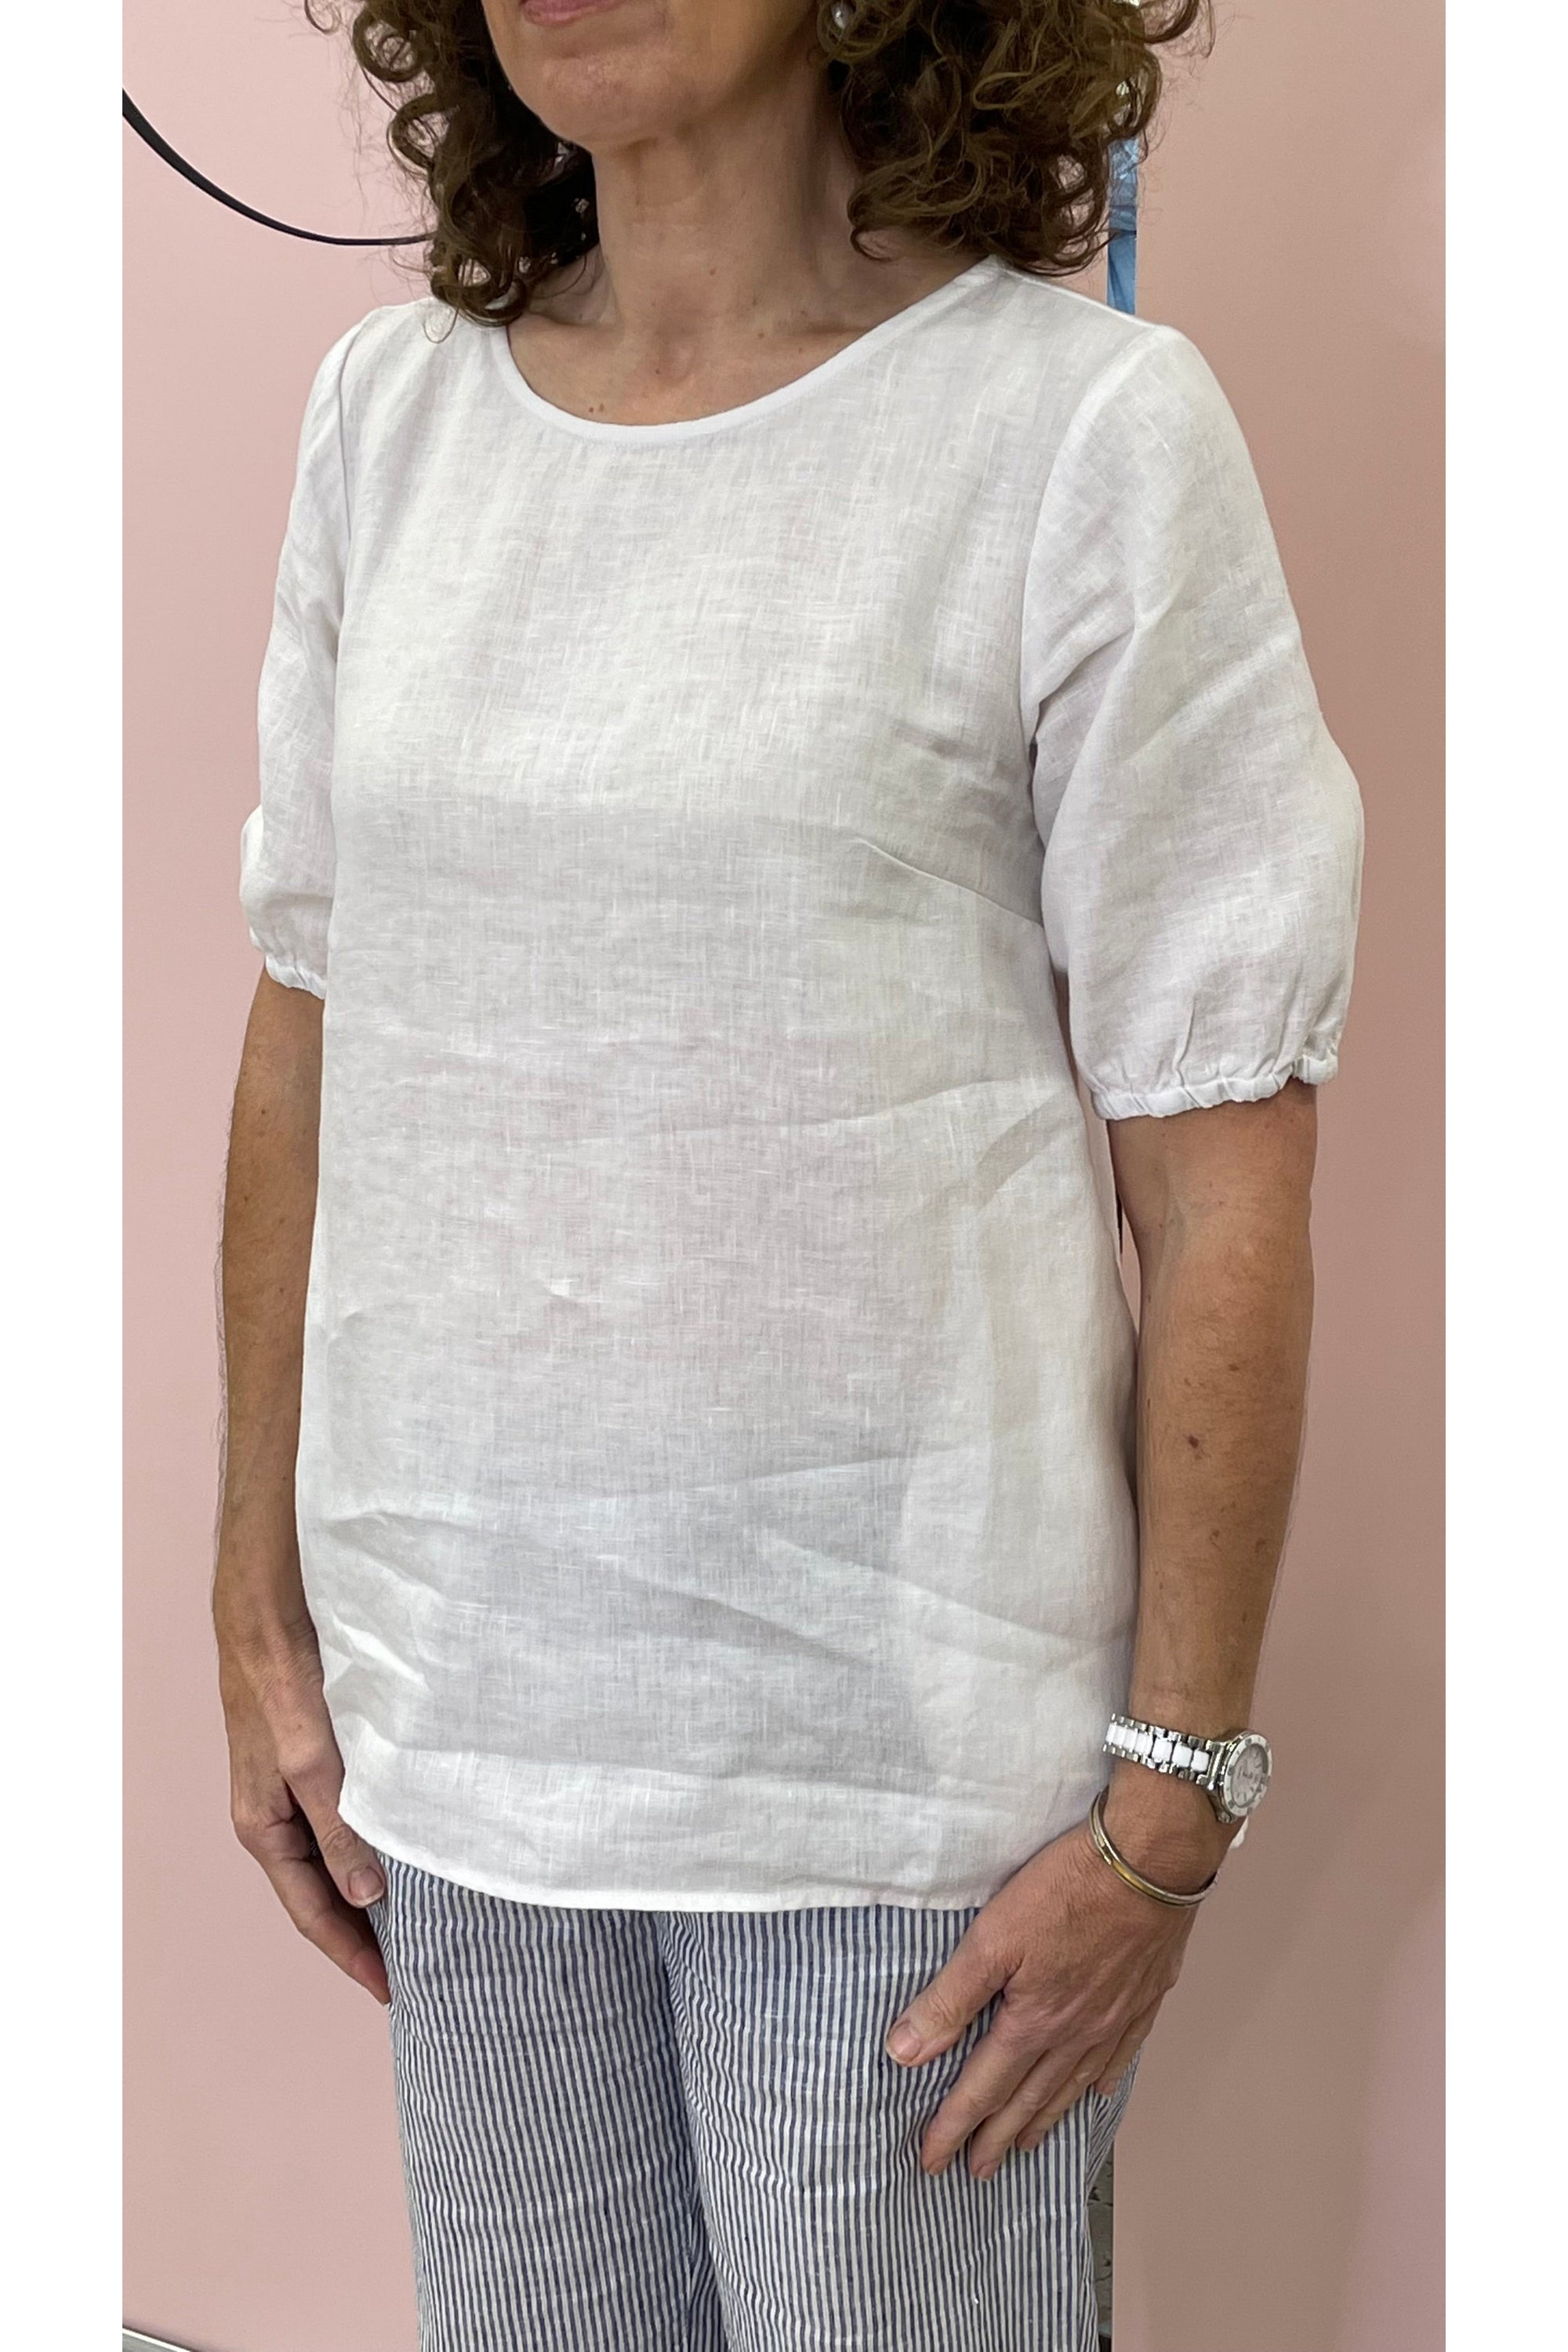 Naturals by O & J Linen Top in White